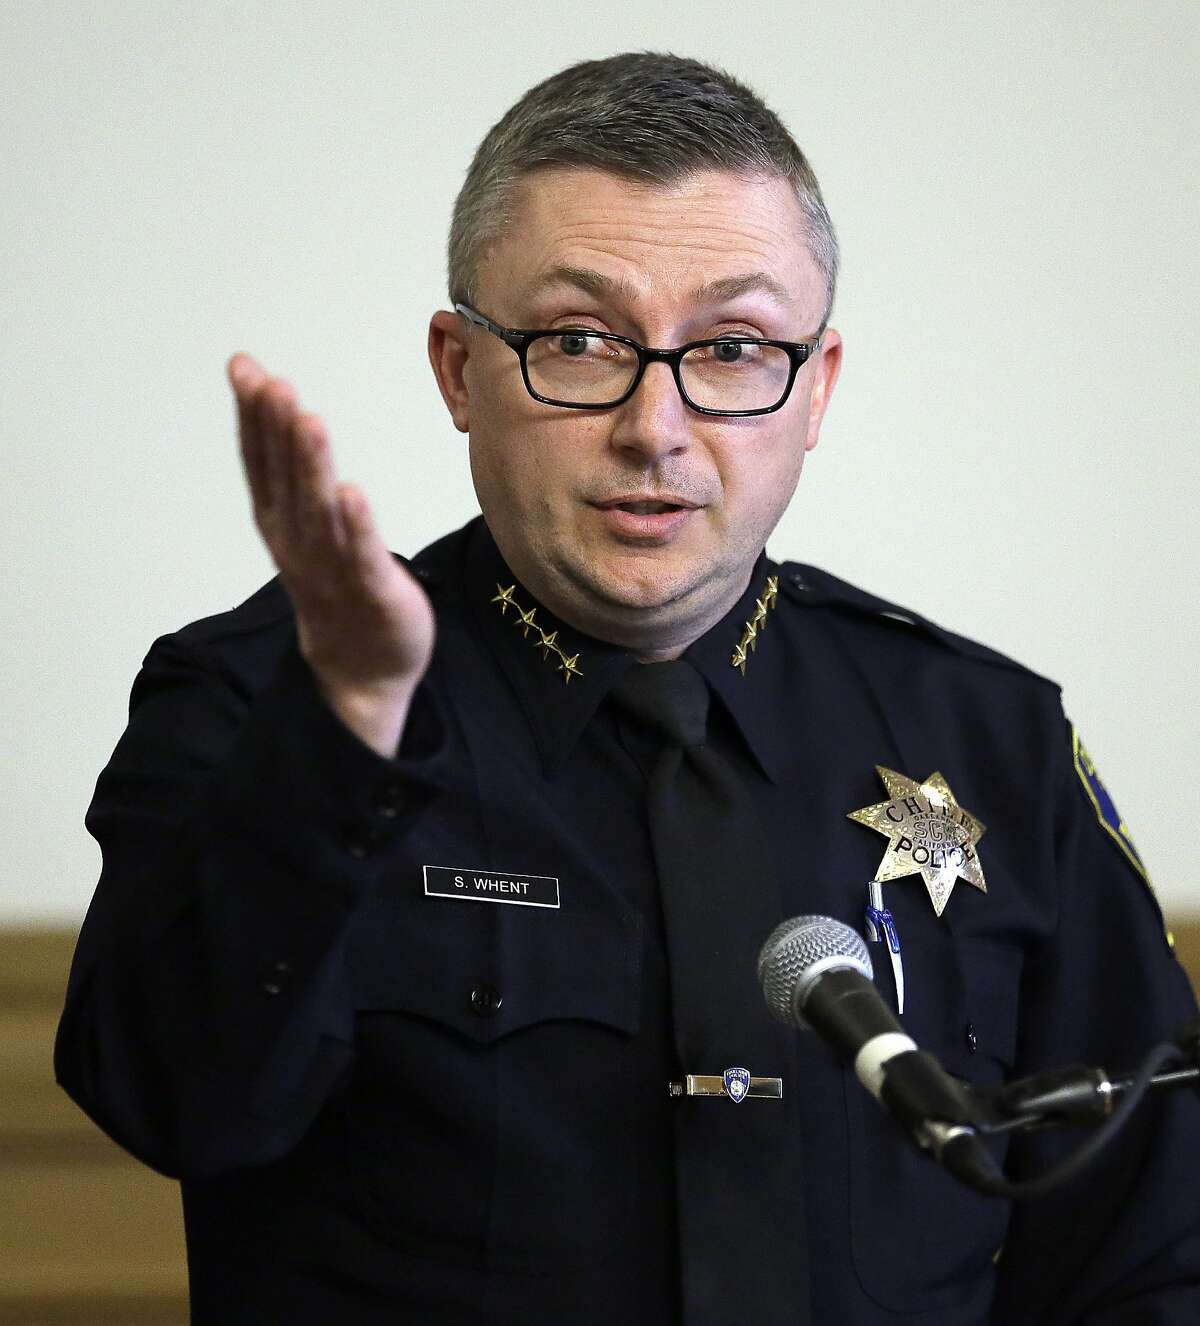 Oakland Chief of Police Sean Whent gestures while speaking during a media conference on Friday, May 13, 2016, in Oakland, Calif. An Internal investigation has been launched into alleged sexual misconduct by three Oakland police officers. (AP Photo/Ben Margot)